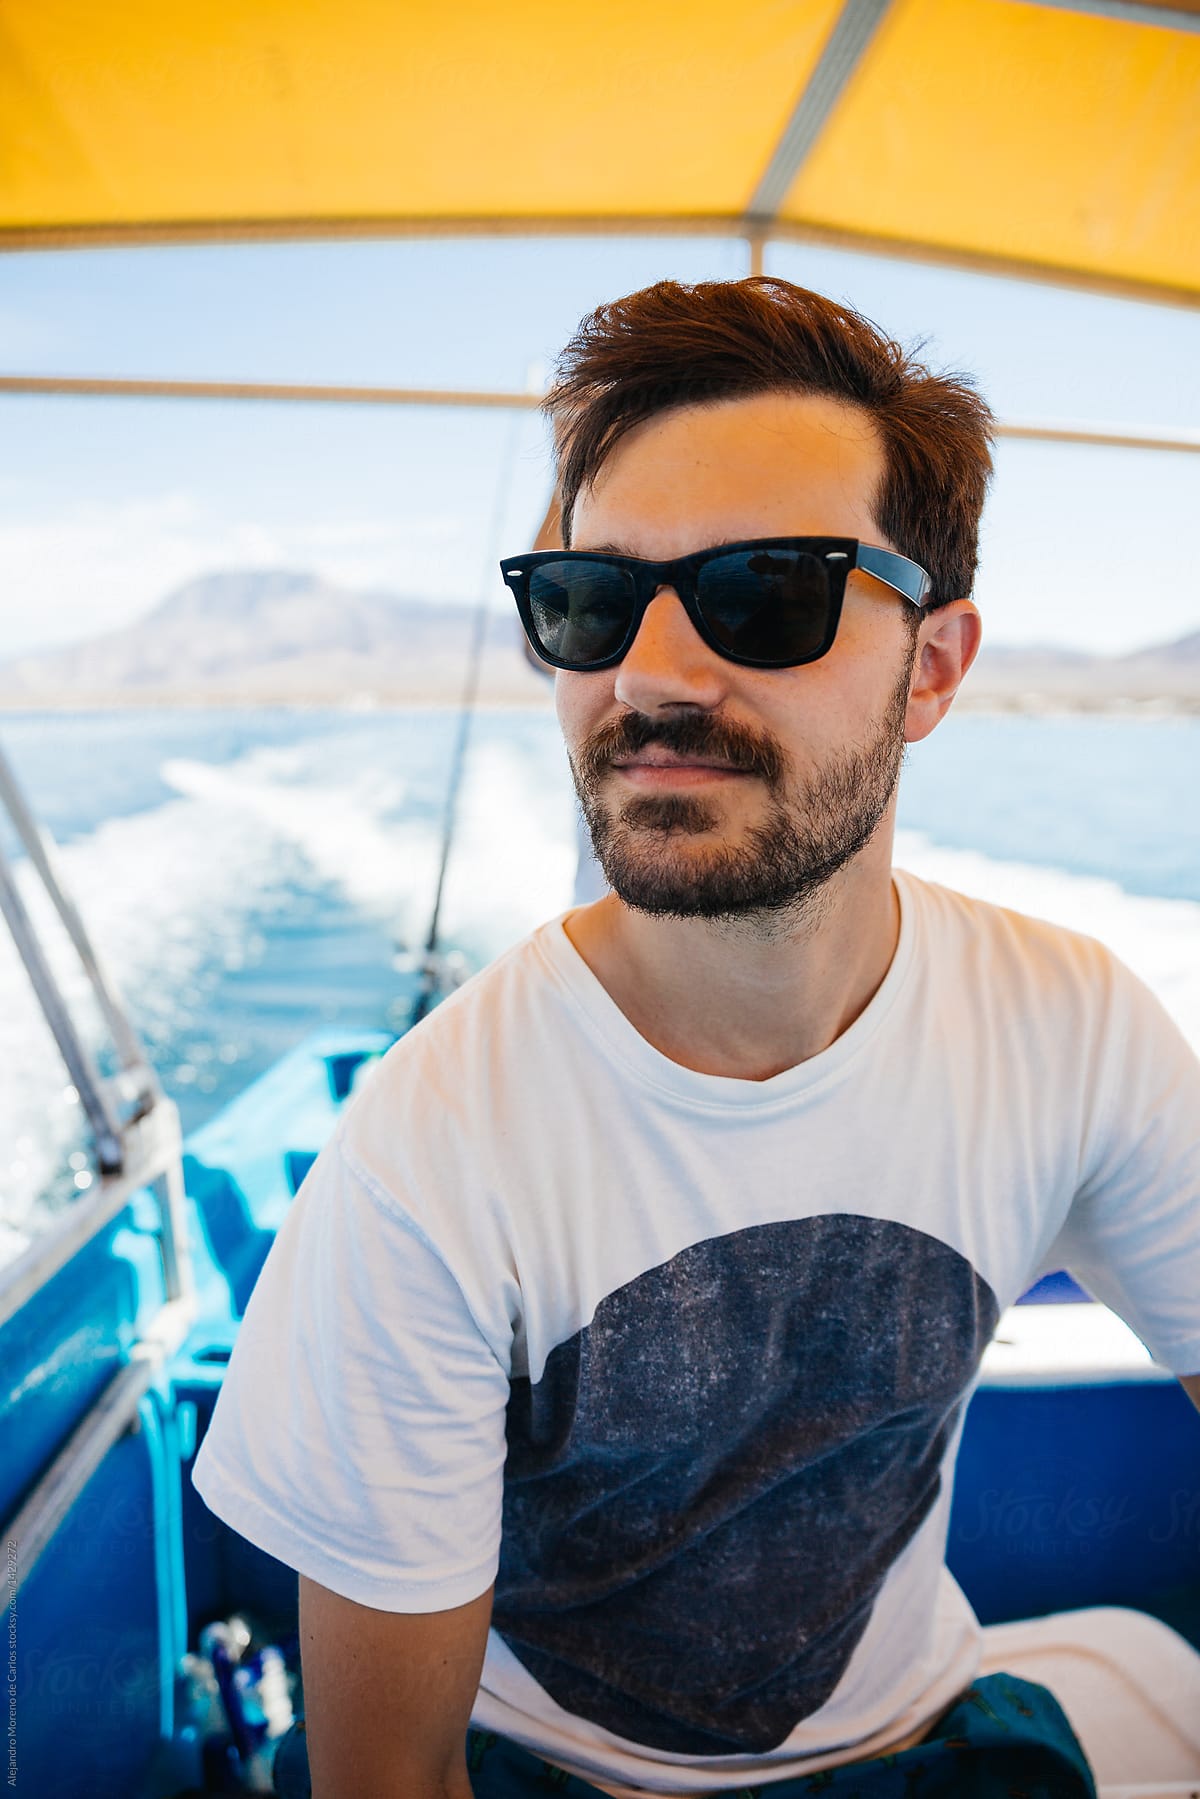 Good-looking bearded man in sunglasses on boat.